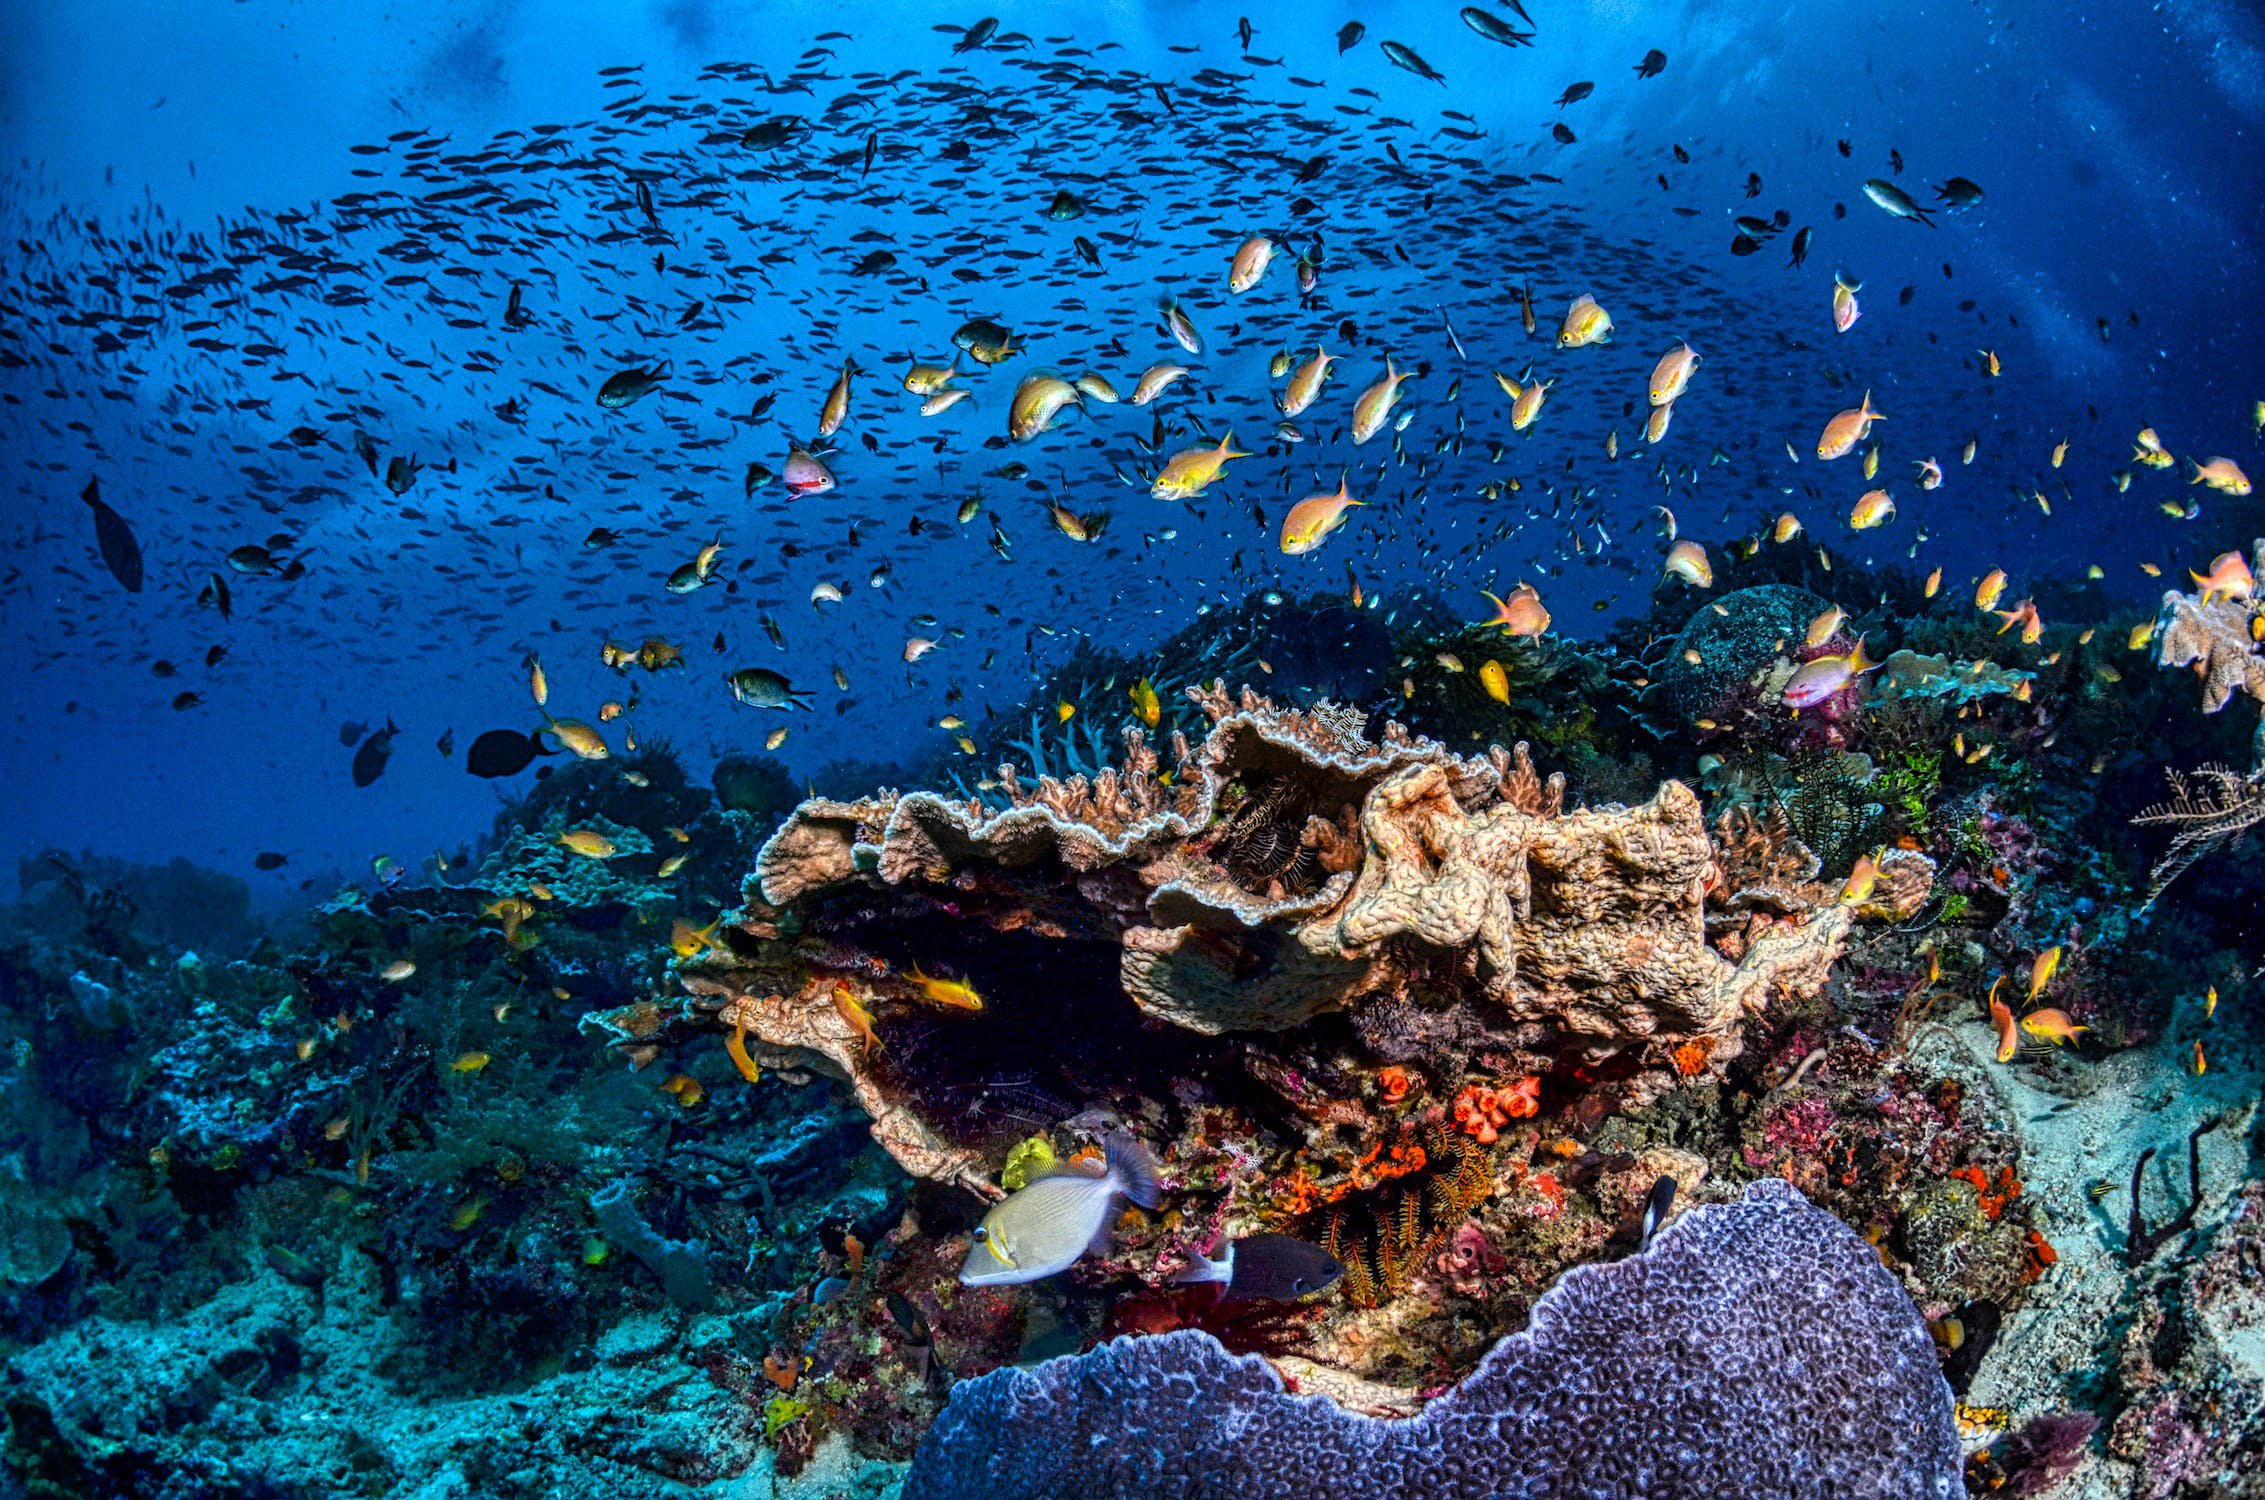 An underwater scene showcasing a diverse array of fish gracefully navigating through a coral reef.